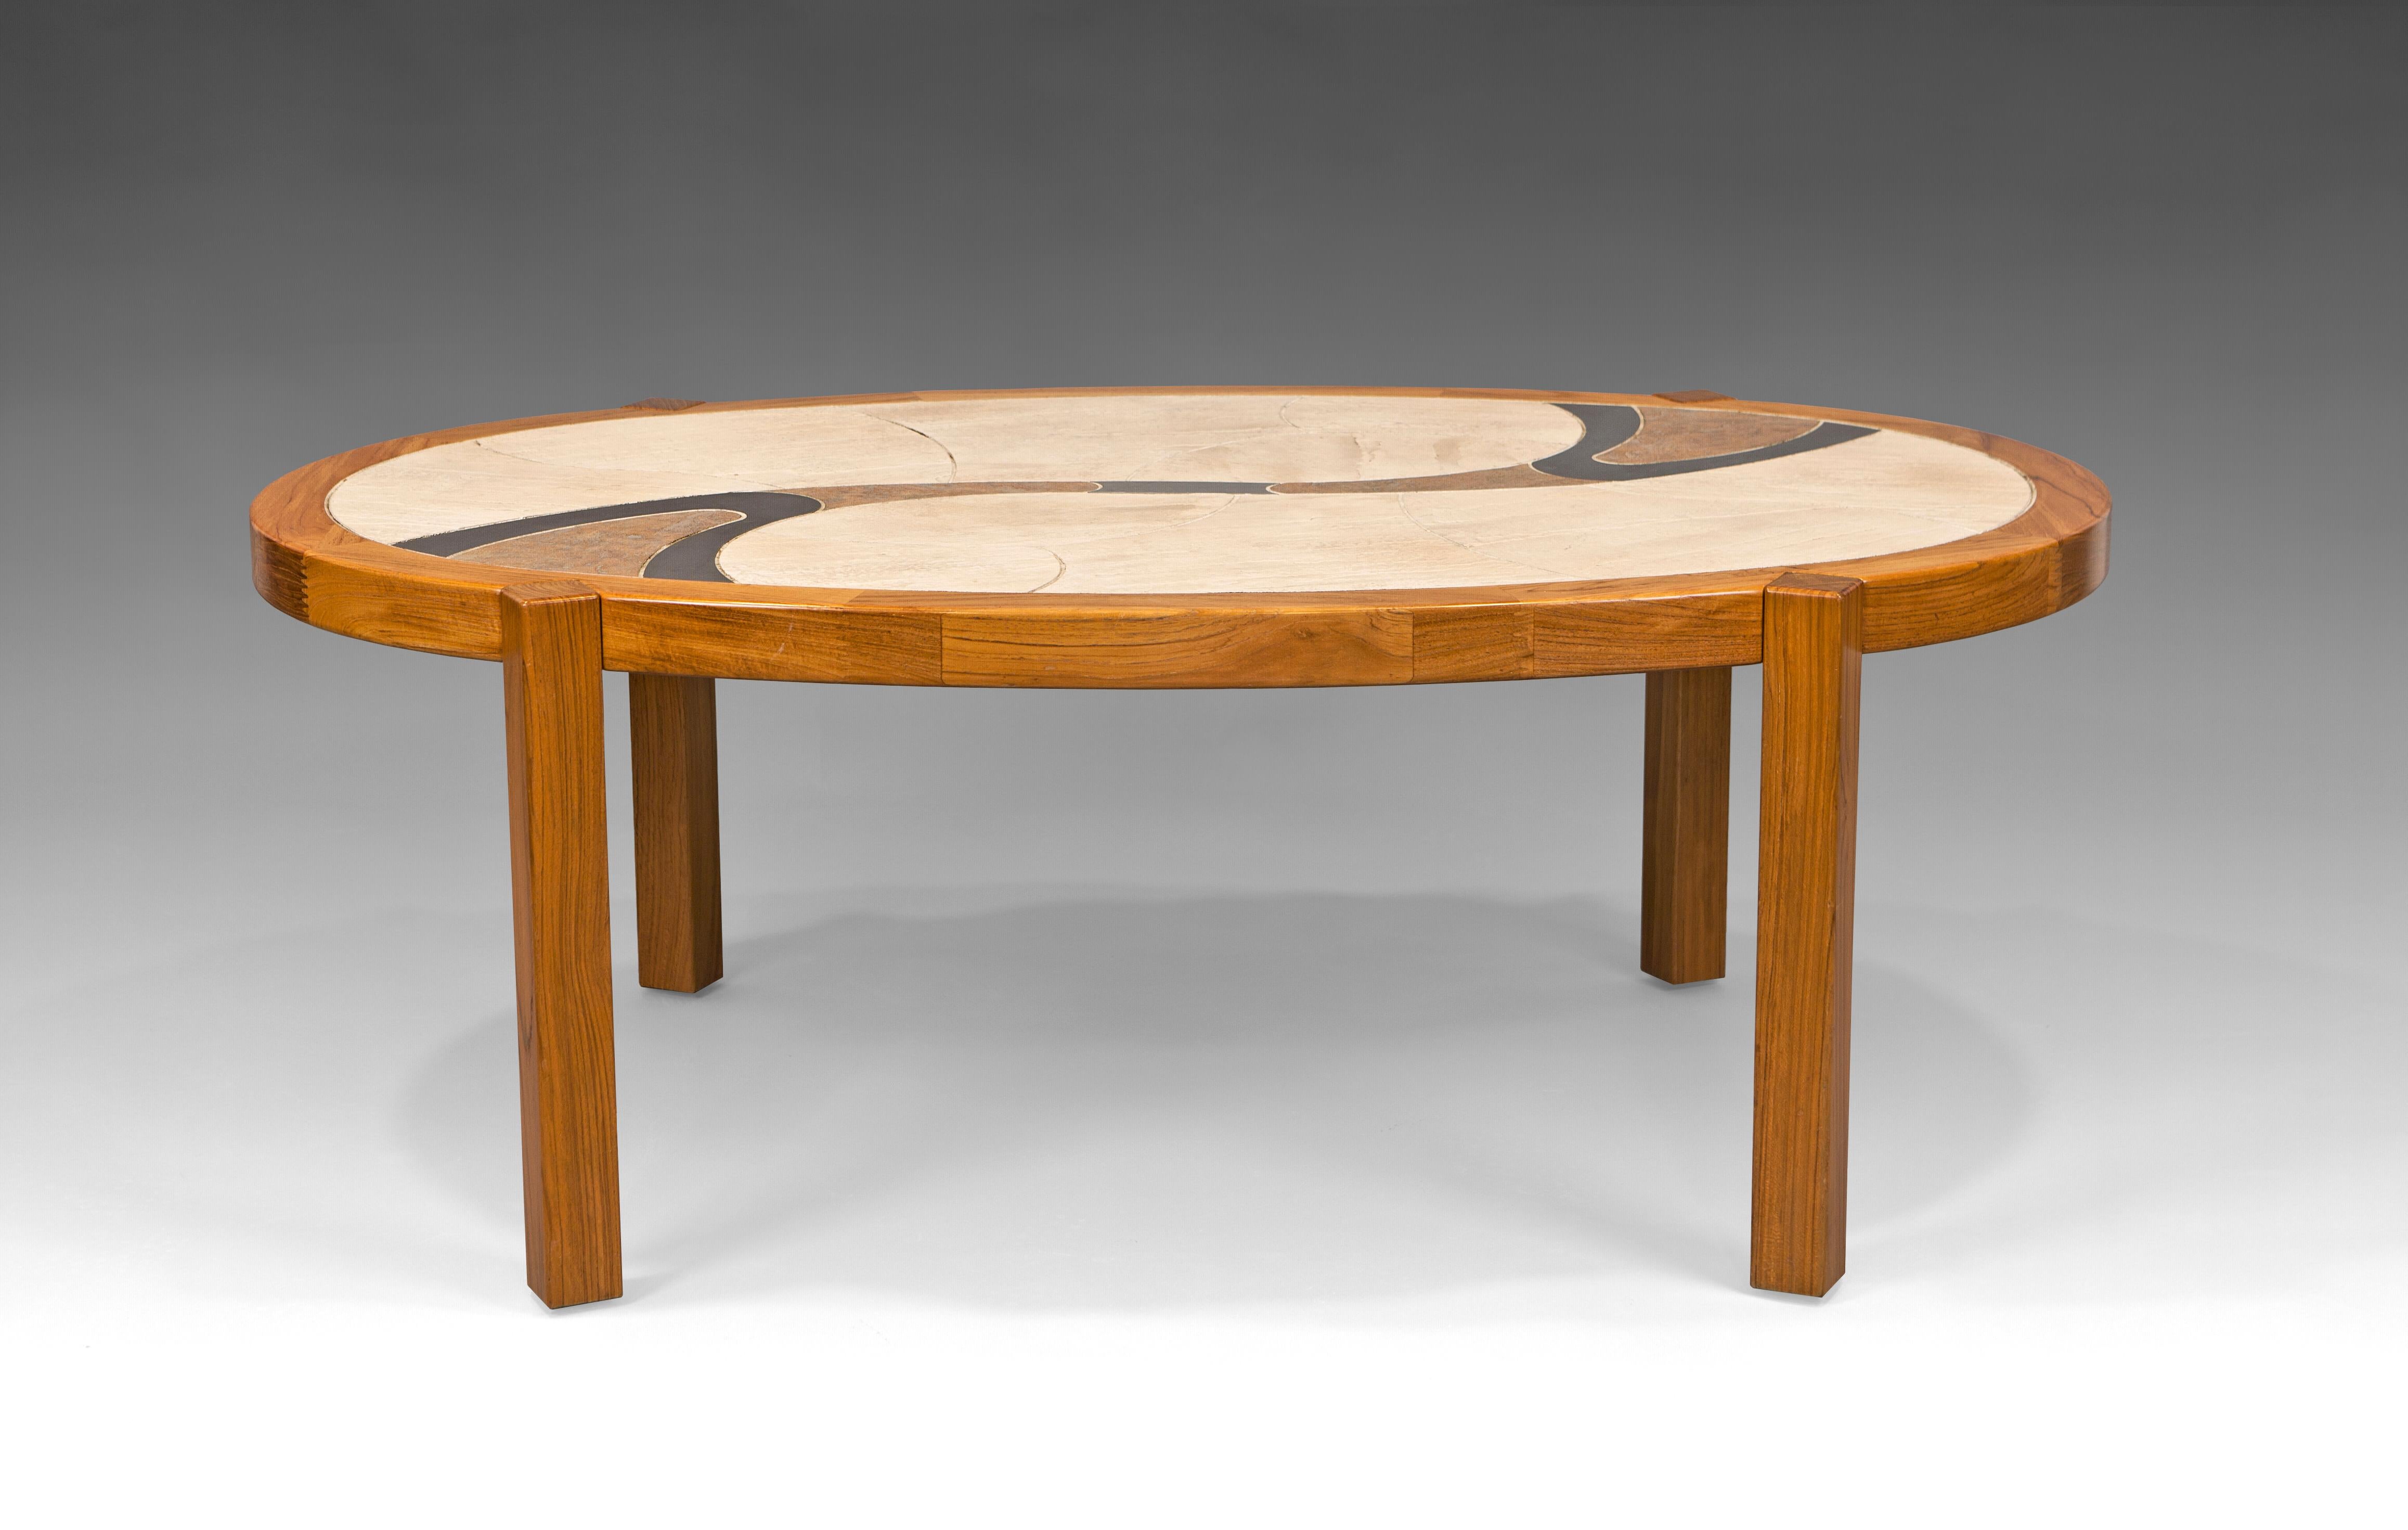 ‘’Arizona’’ coffee table by Haslev, Denmark, 1990s

Oak wood coffe, cocktail or center table featuring an oval shape with earth-tones ceramic tiles in an organic pattern. Two mettalic inlay details give the surface a more complex and attractive